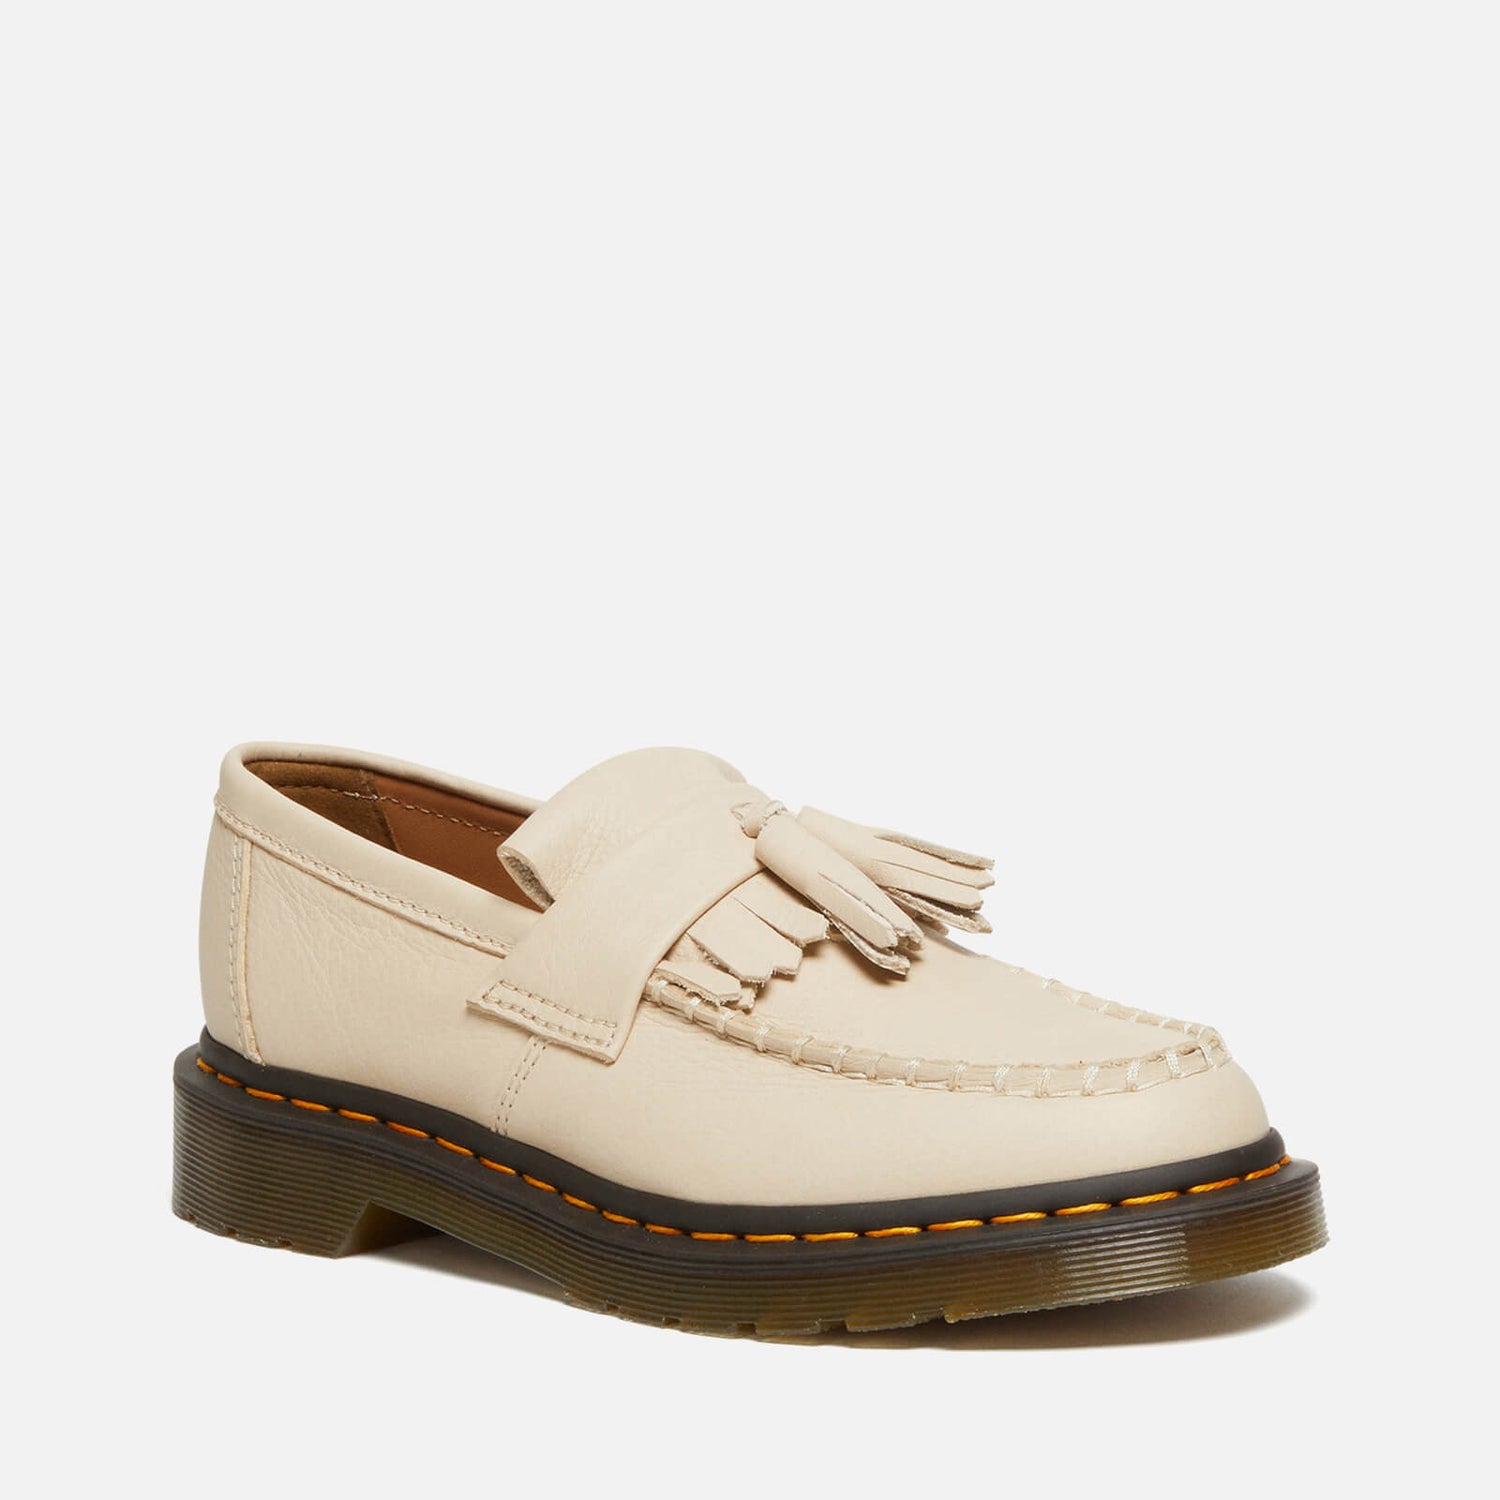 Dr. Martens Women's Leather Loafers - UK 3